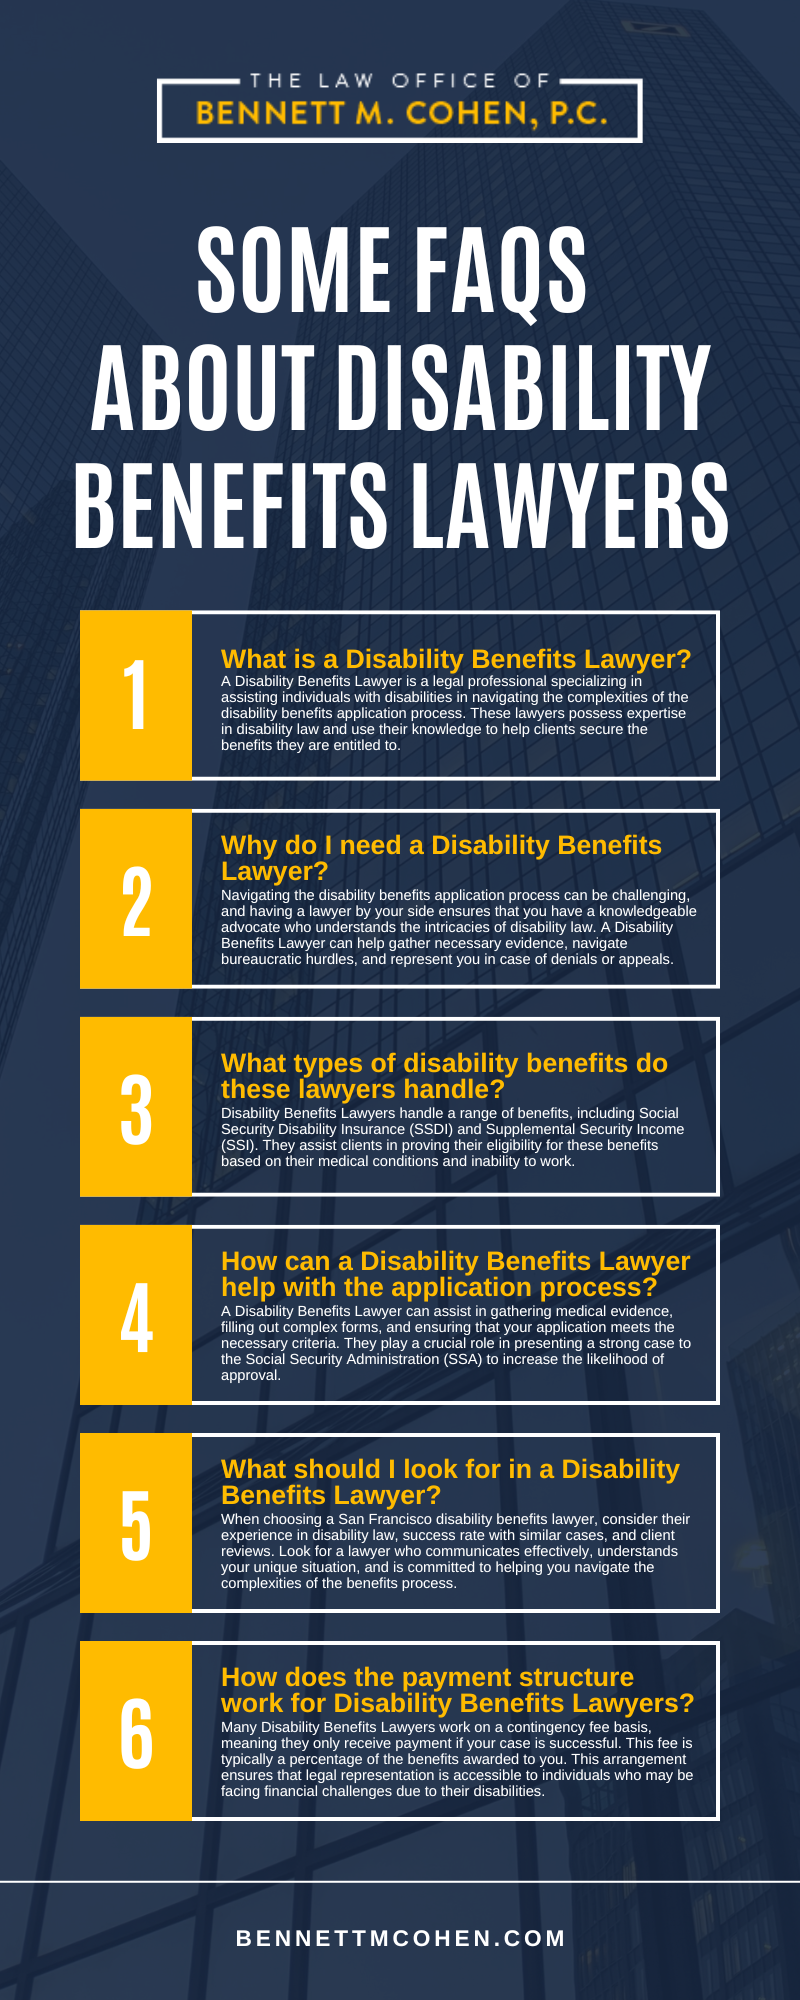 Some FAQs About Disability Benefits Lawyers Infographic